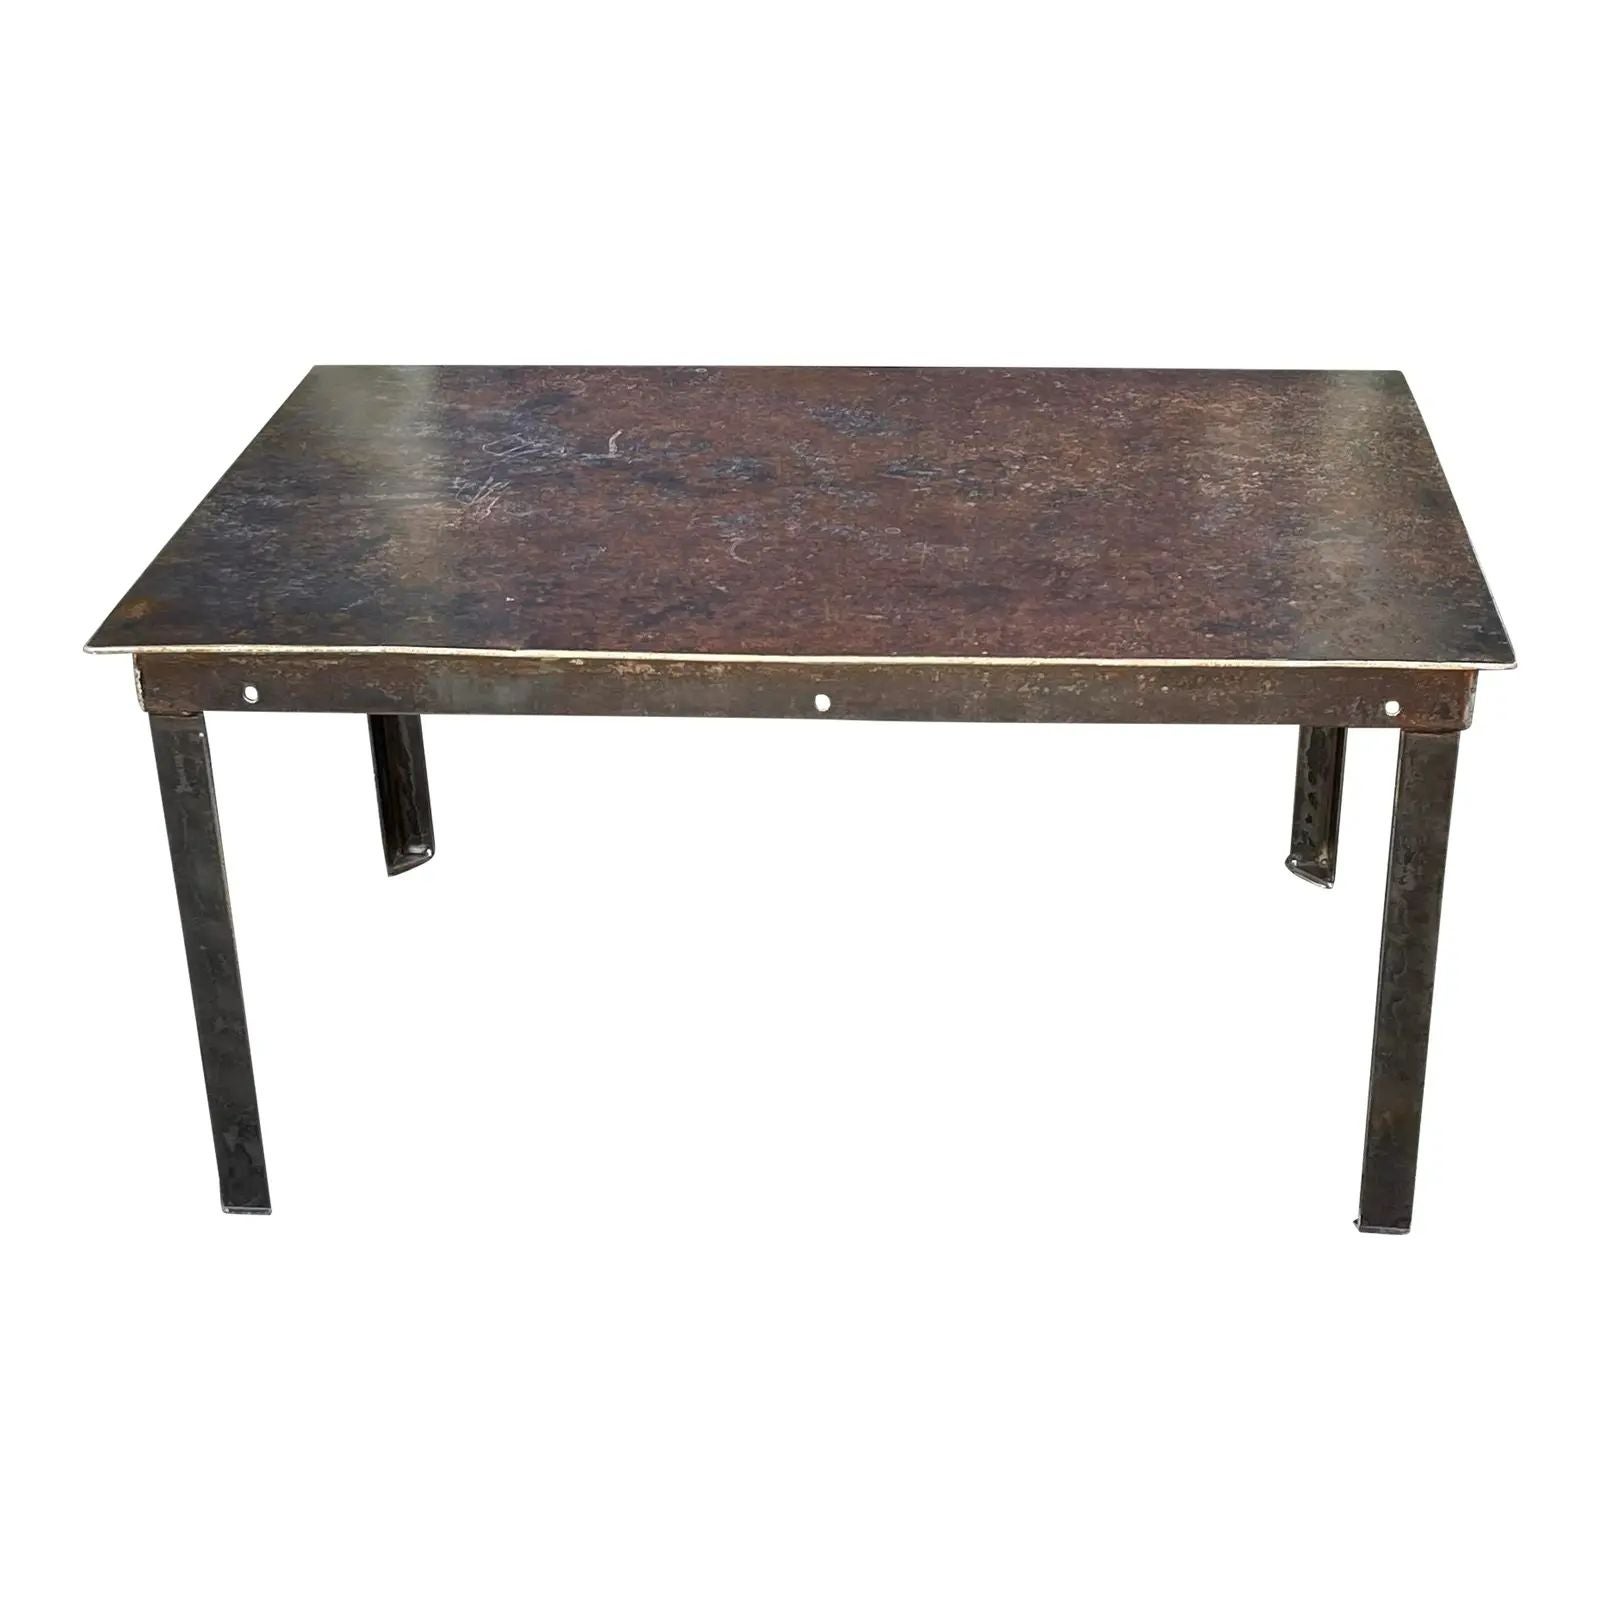 Modern Pounded Iron Industrial Chic Coffee Cocktail Table im Angebot